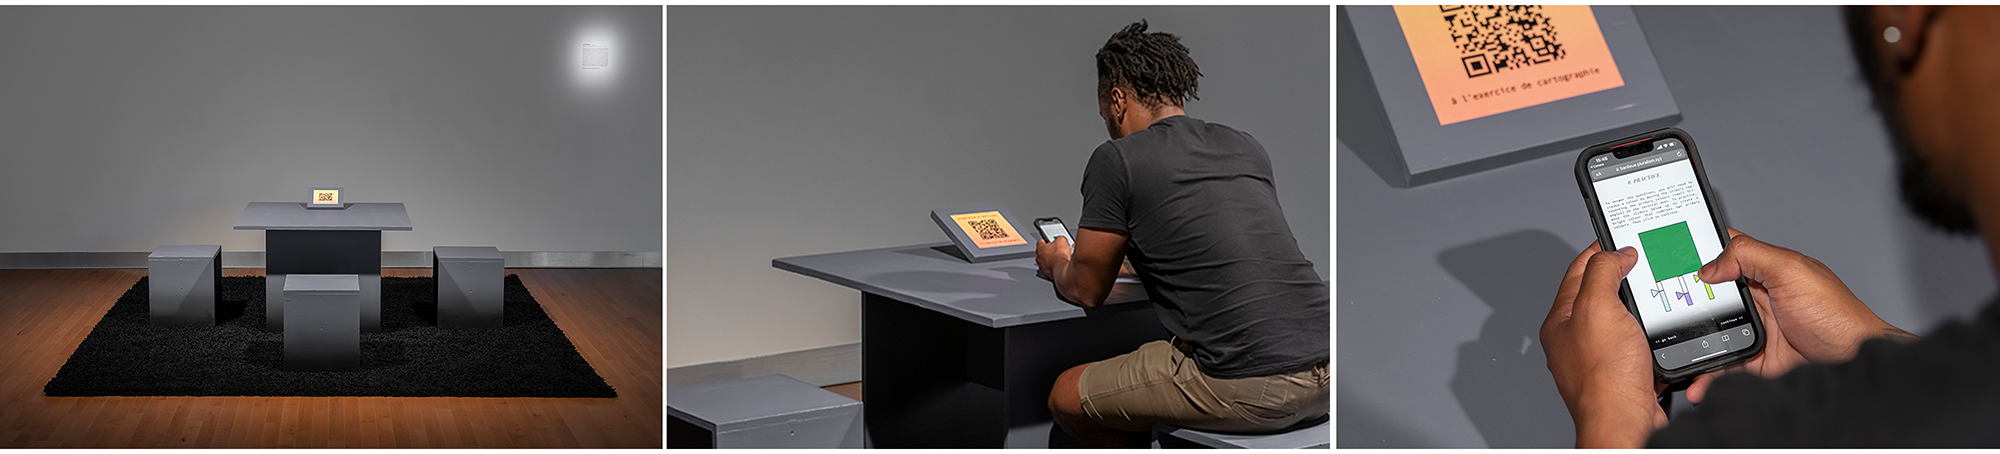 Three screenshots of the installation; one with an overview of the table, one with a man sitting at the table filling out the survey on his phone, one with a close-up of the man's phone showing the survey.